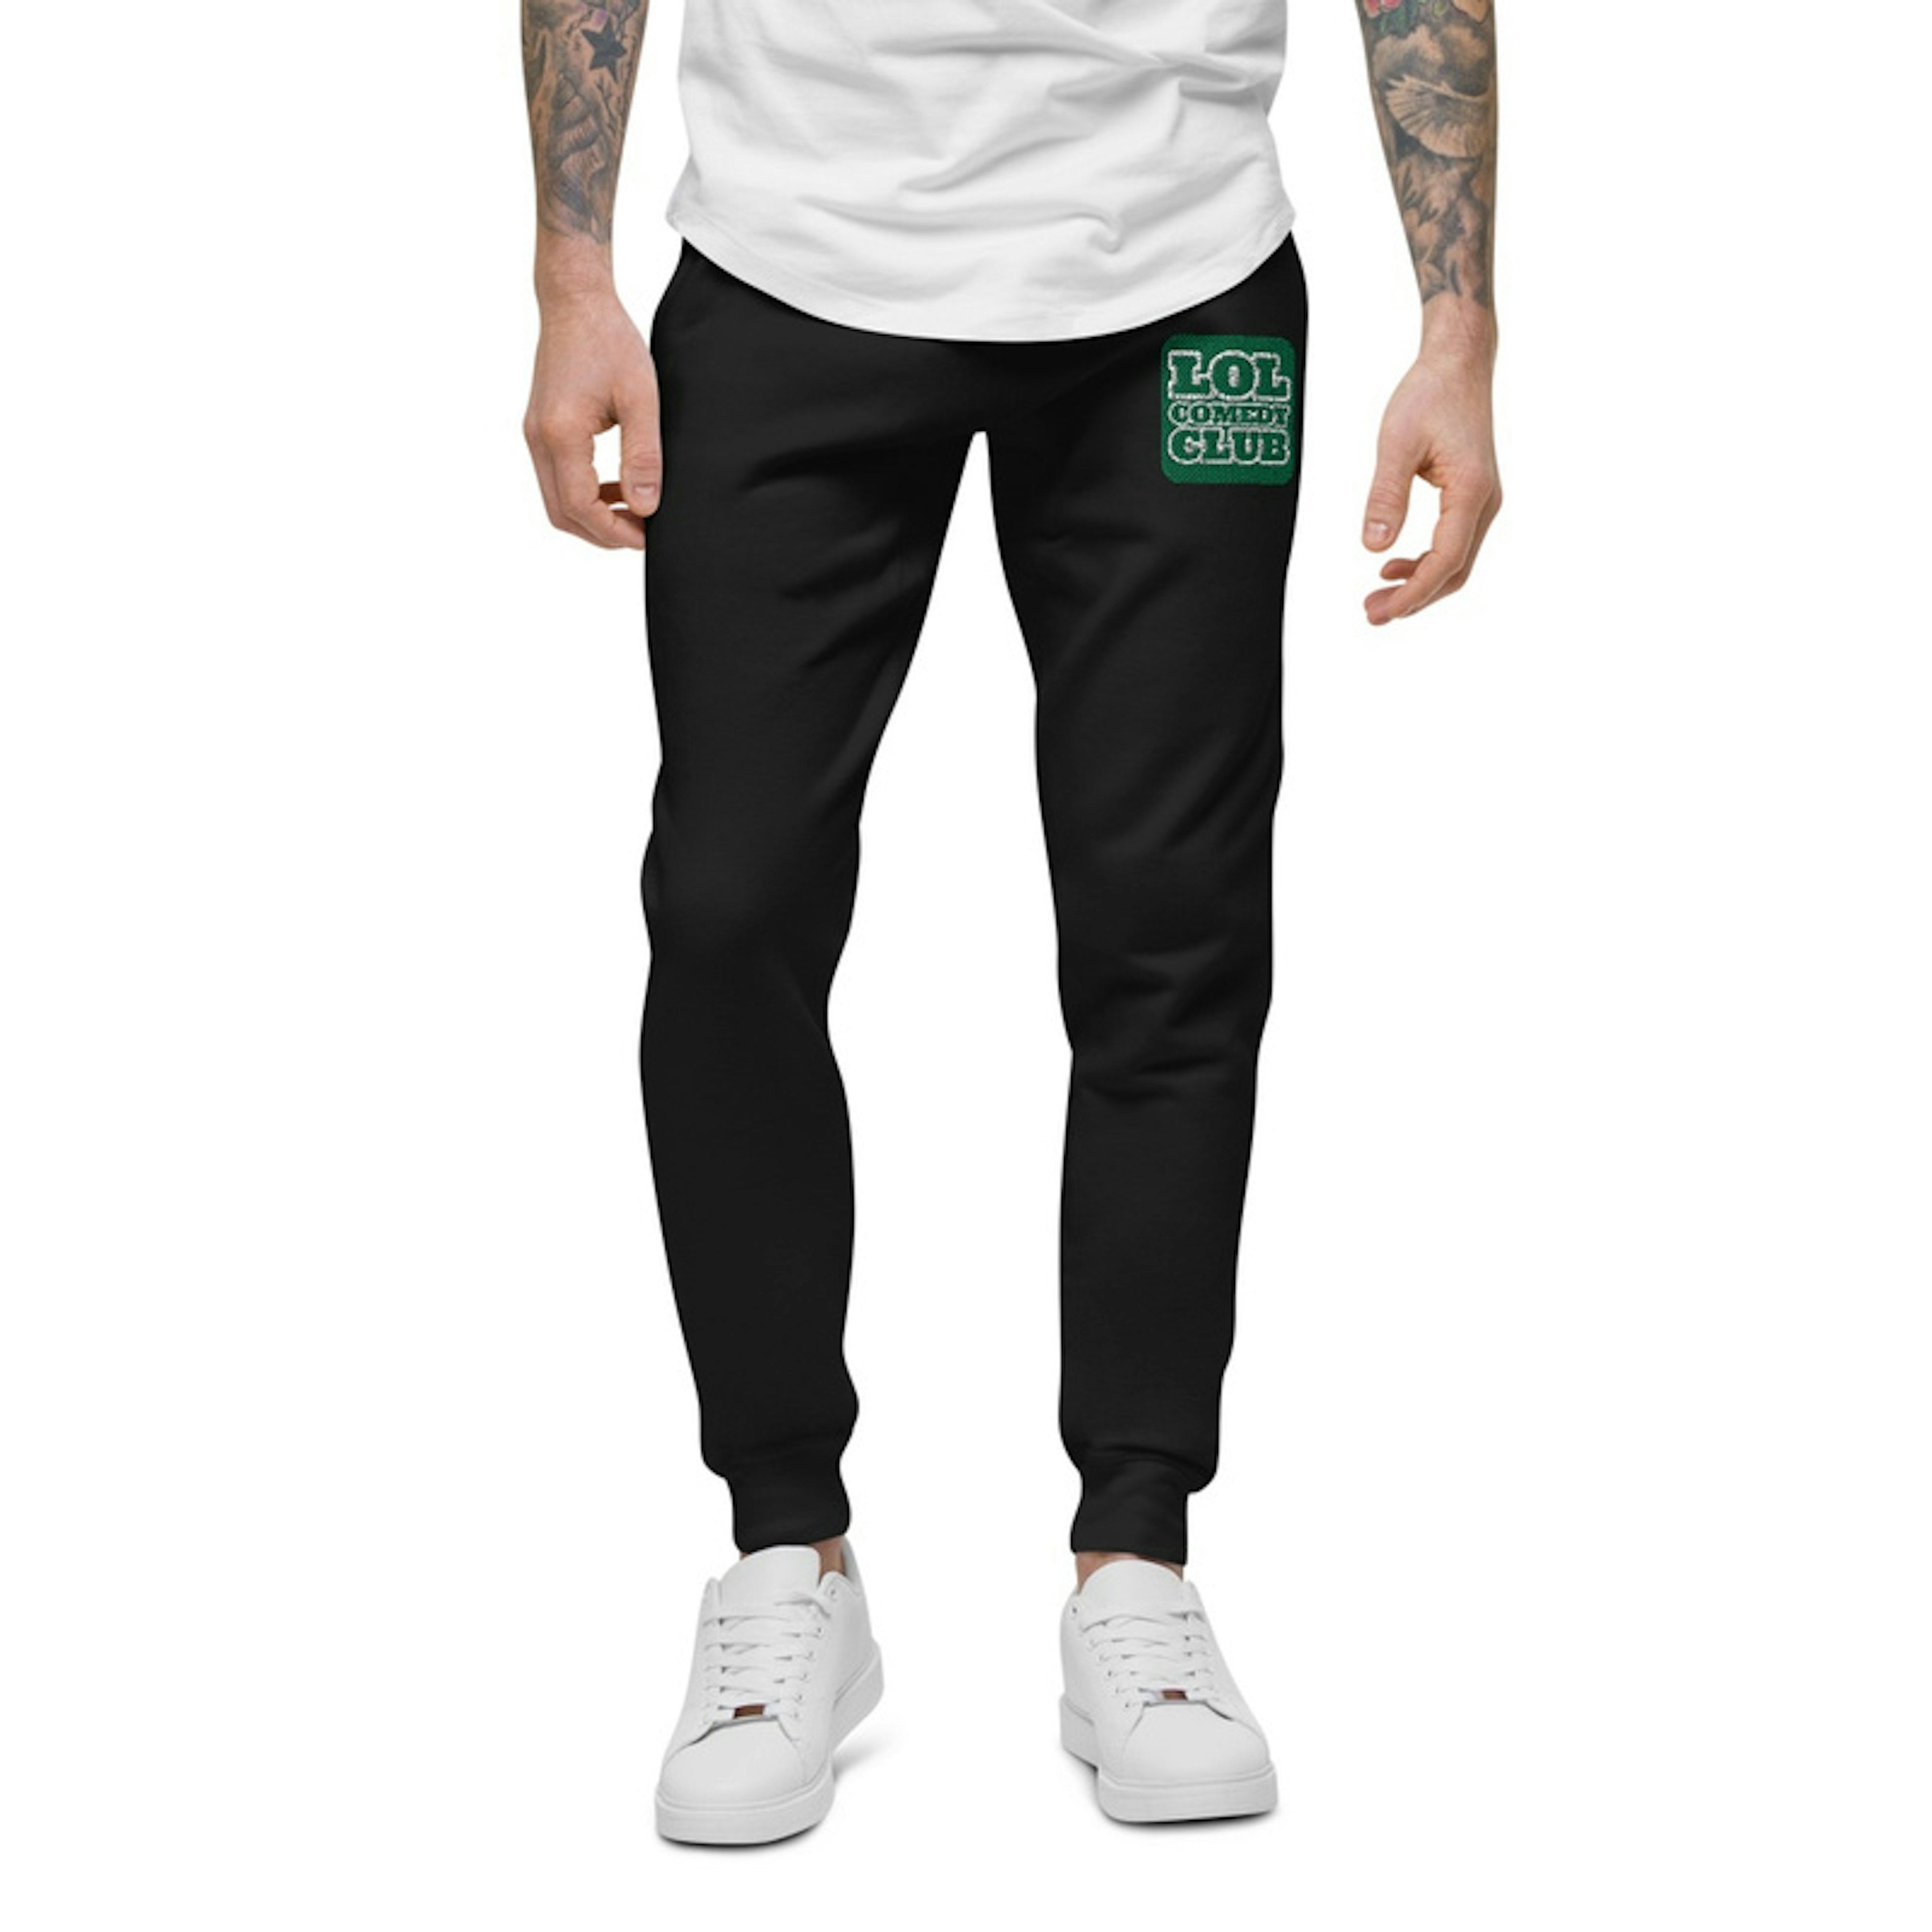 LOL Comedy Club Embroidered Jogger